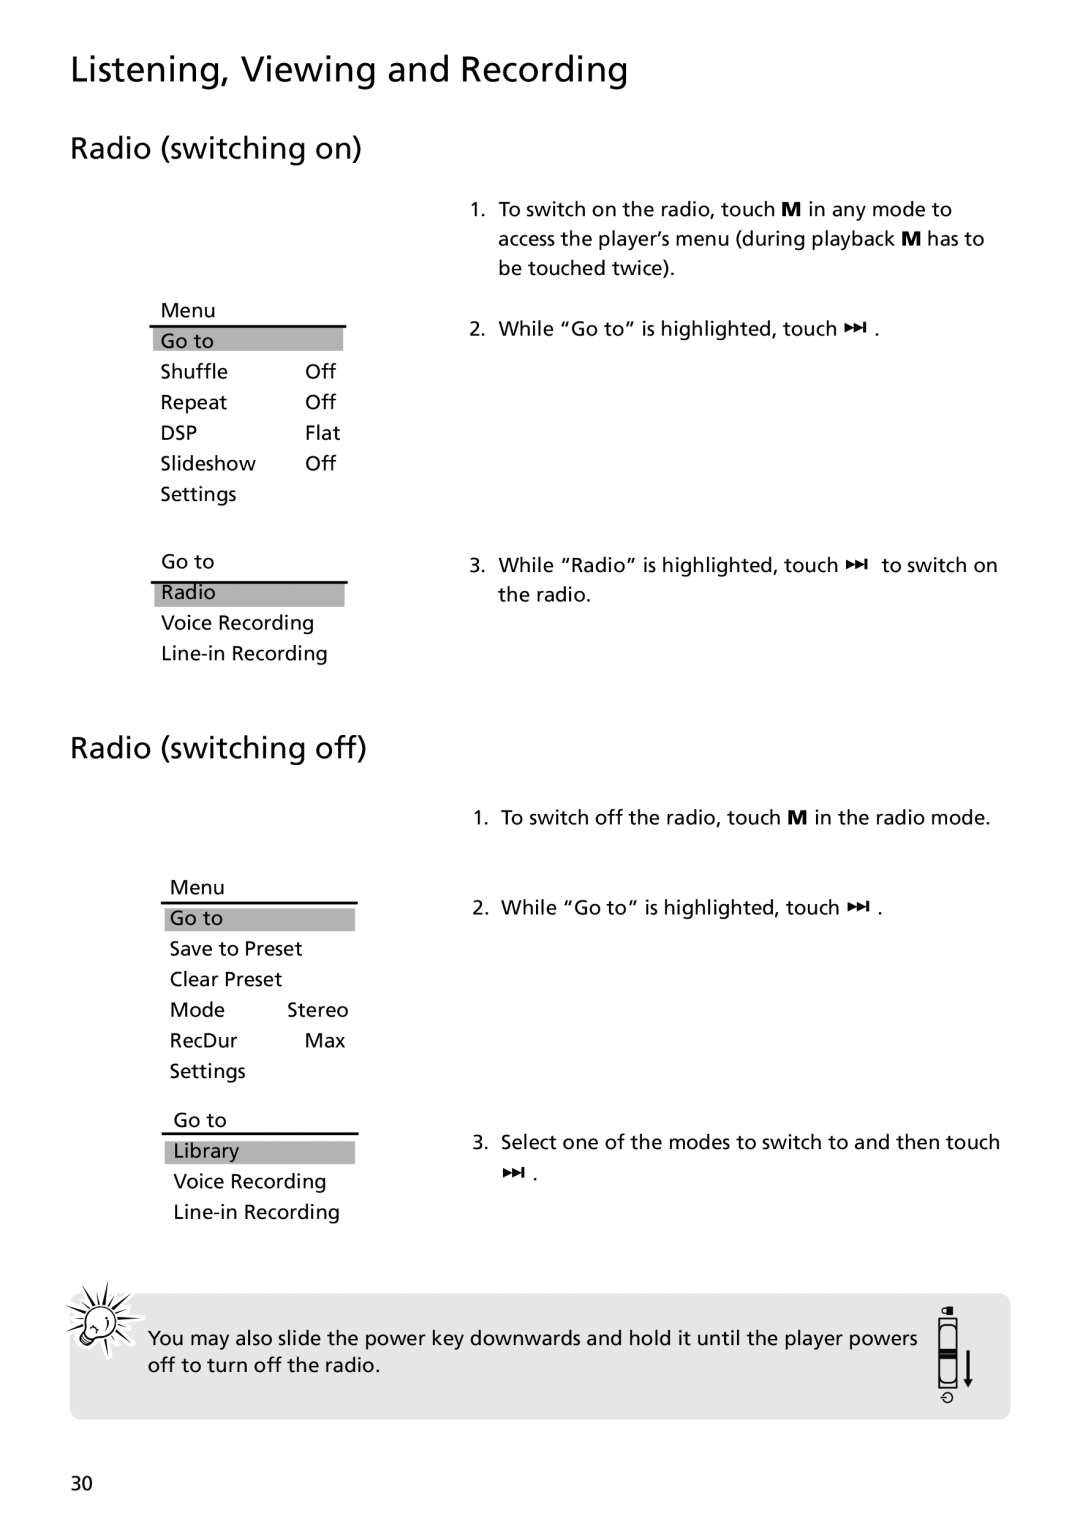 RCA MC5104 user manual Radio switching on, Radio switching off, Listening, Viewing and Recording 